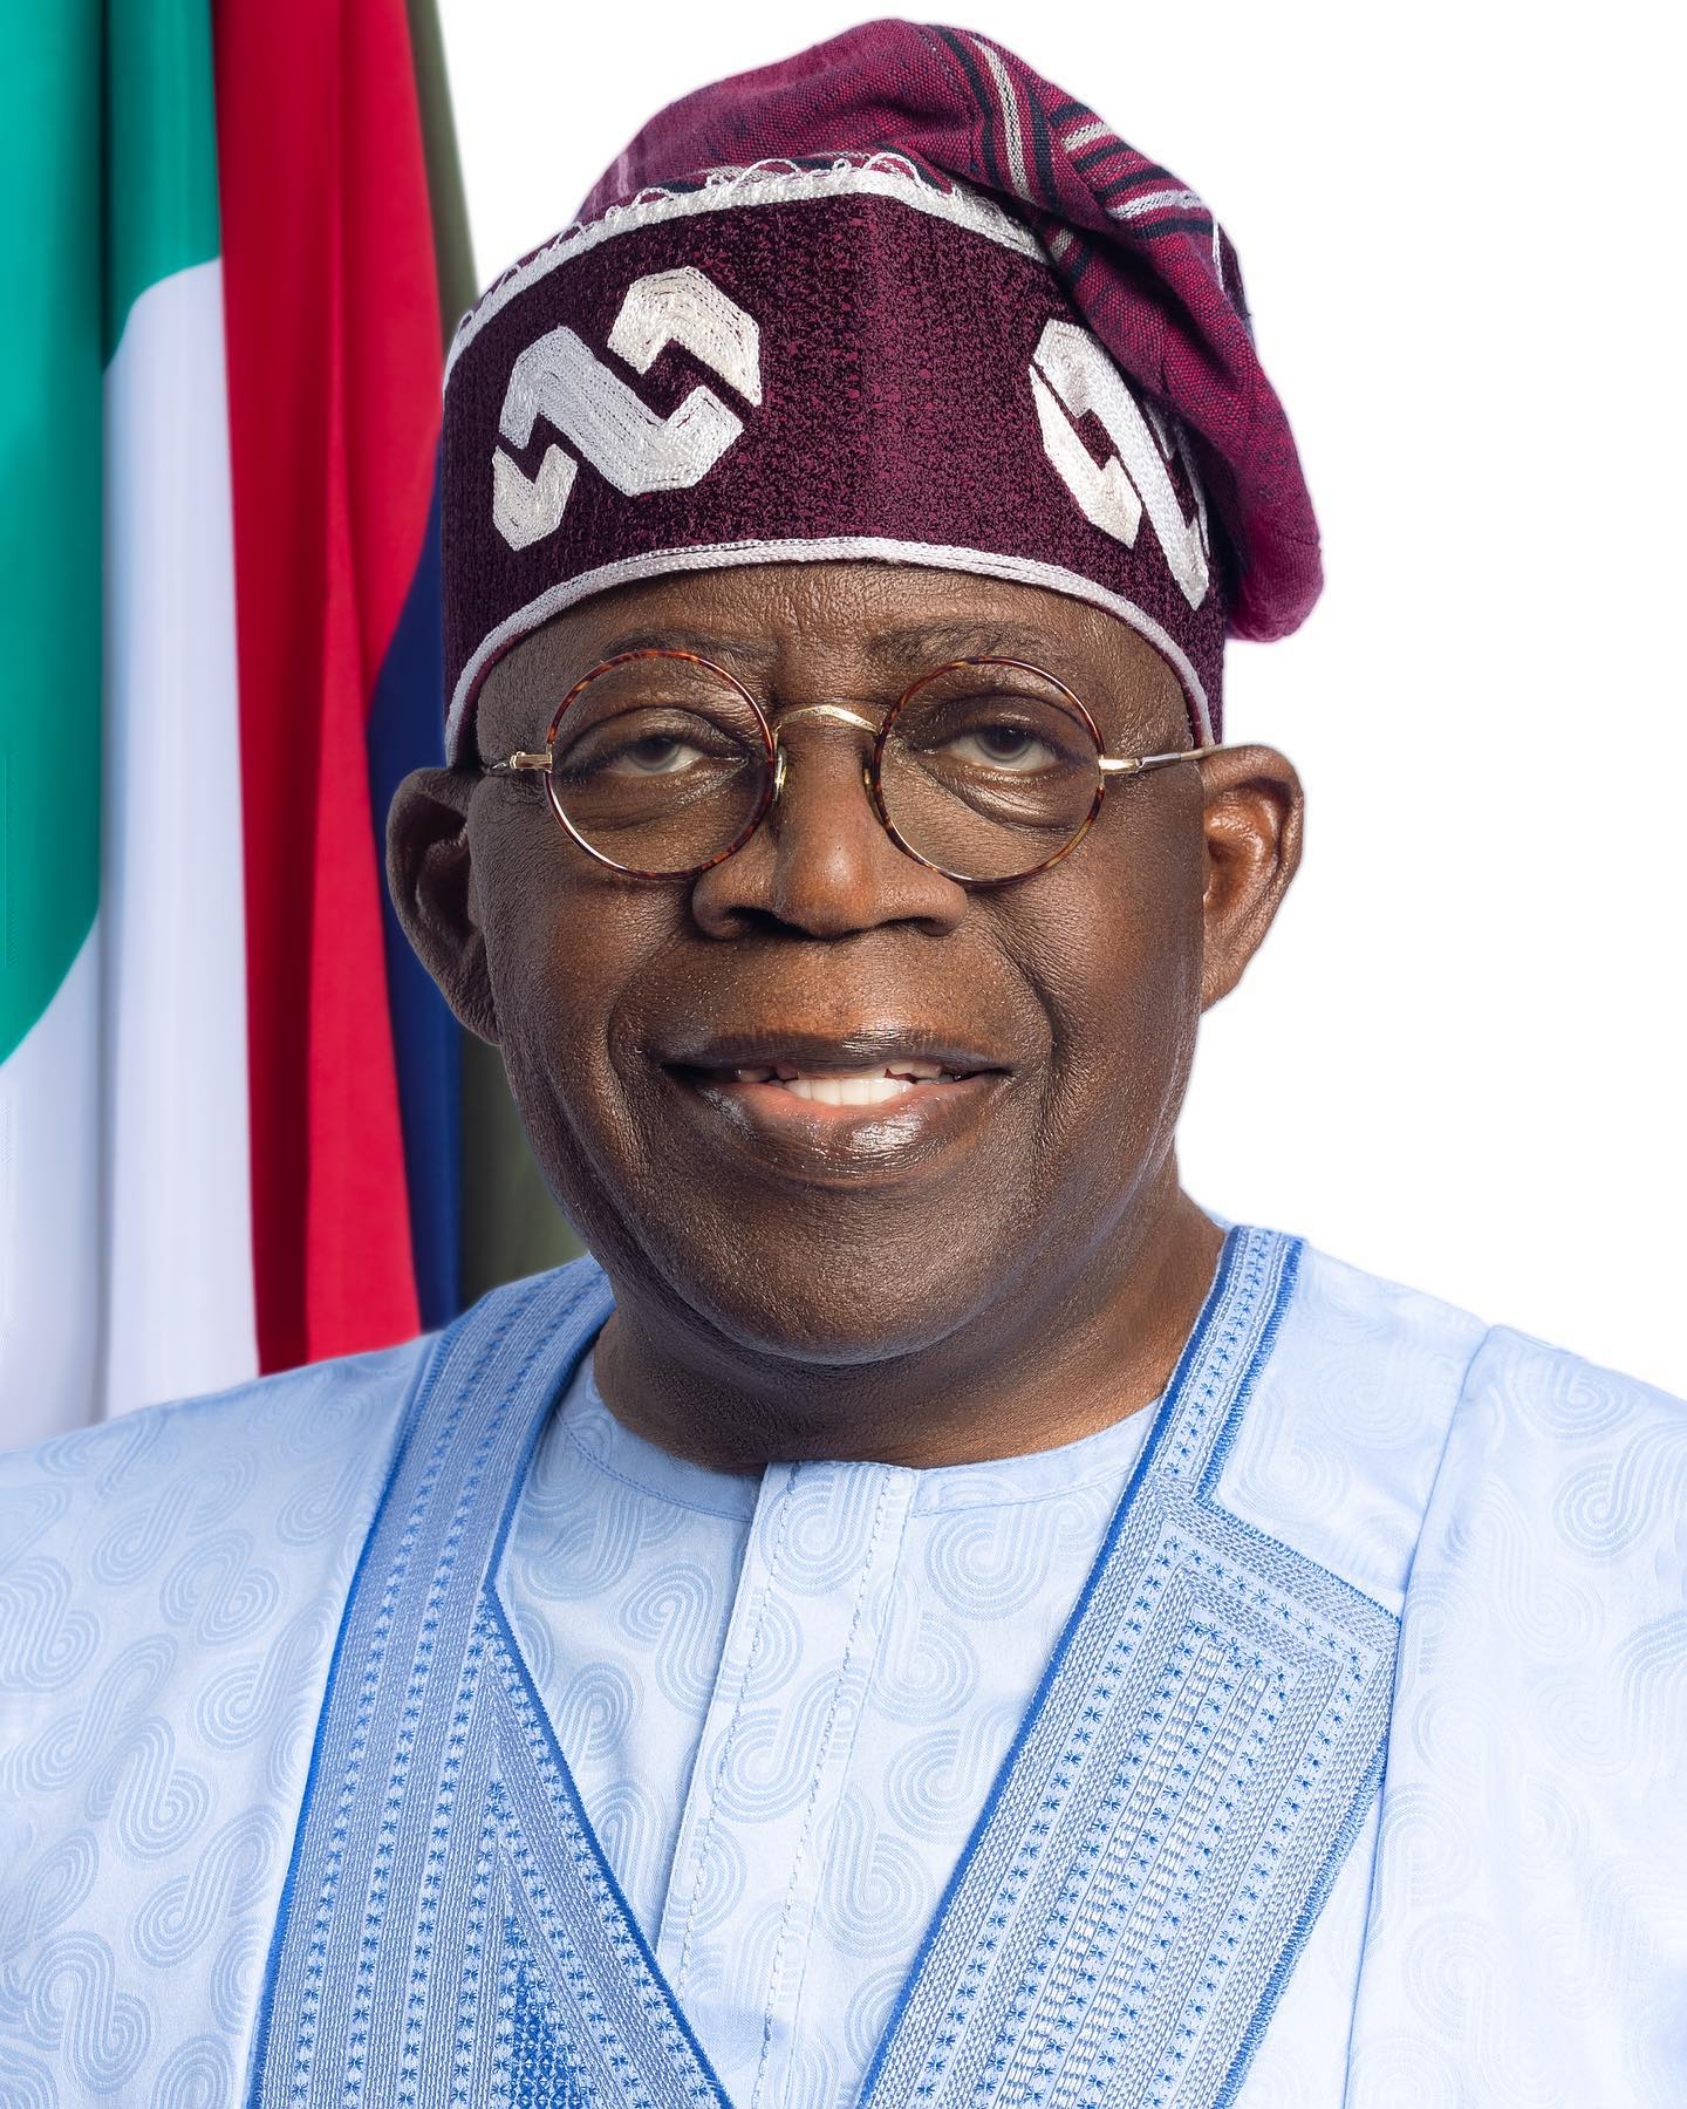 Tinubu appeals to Reps for N500bn palliatives to cushion subsidy removal